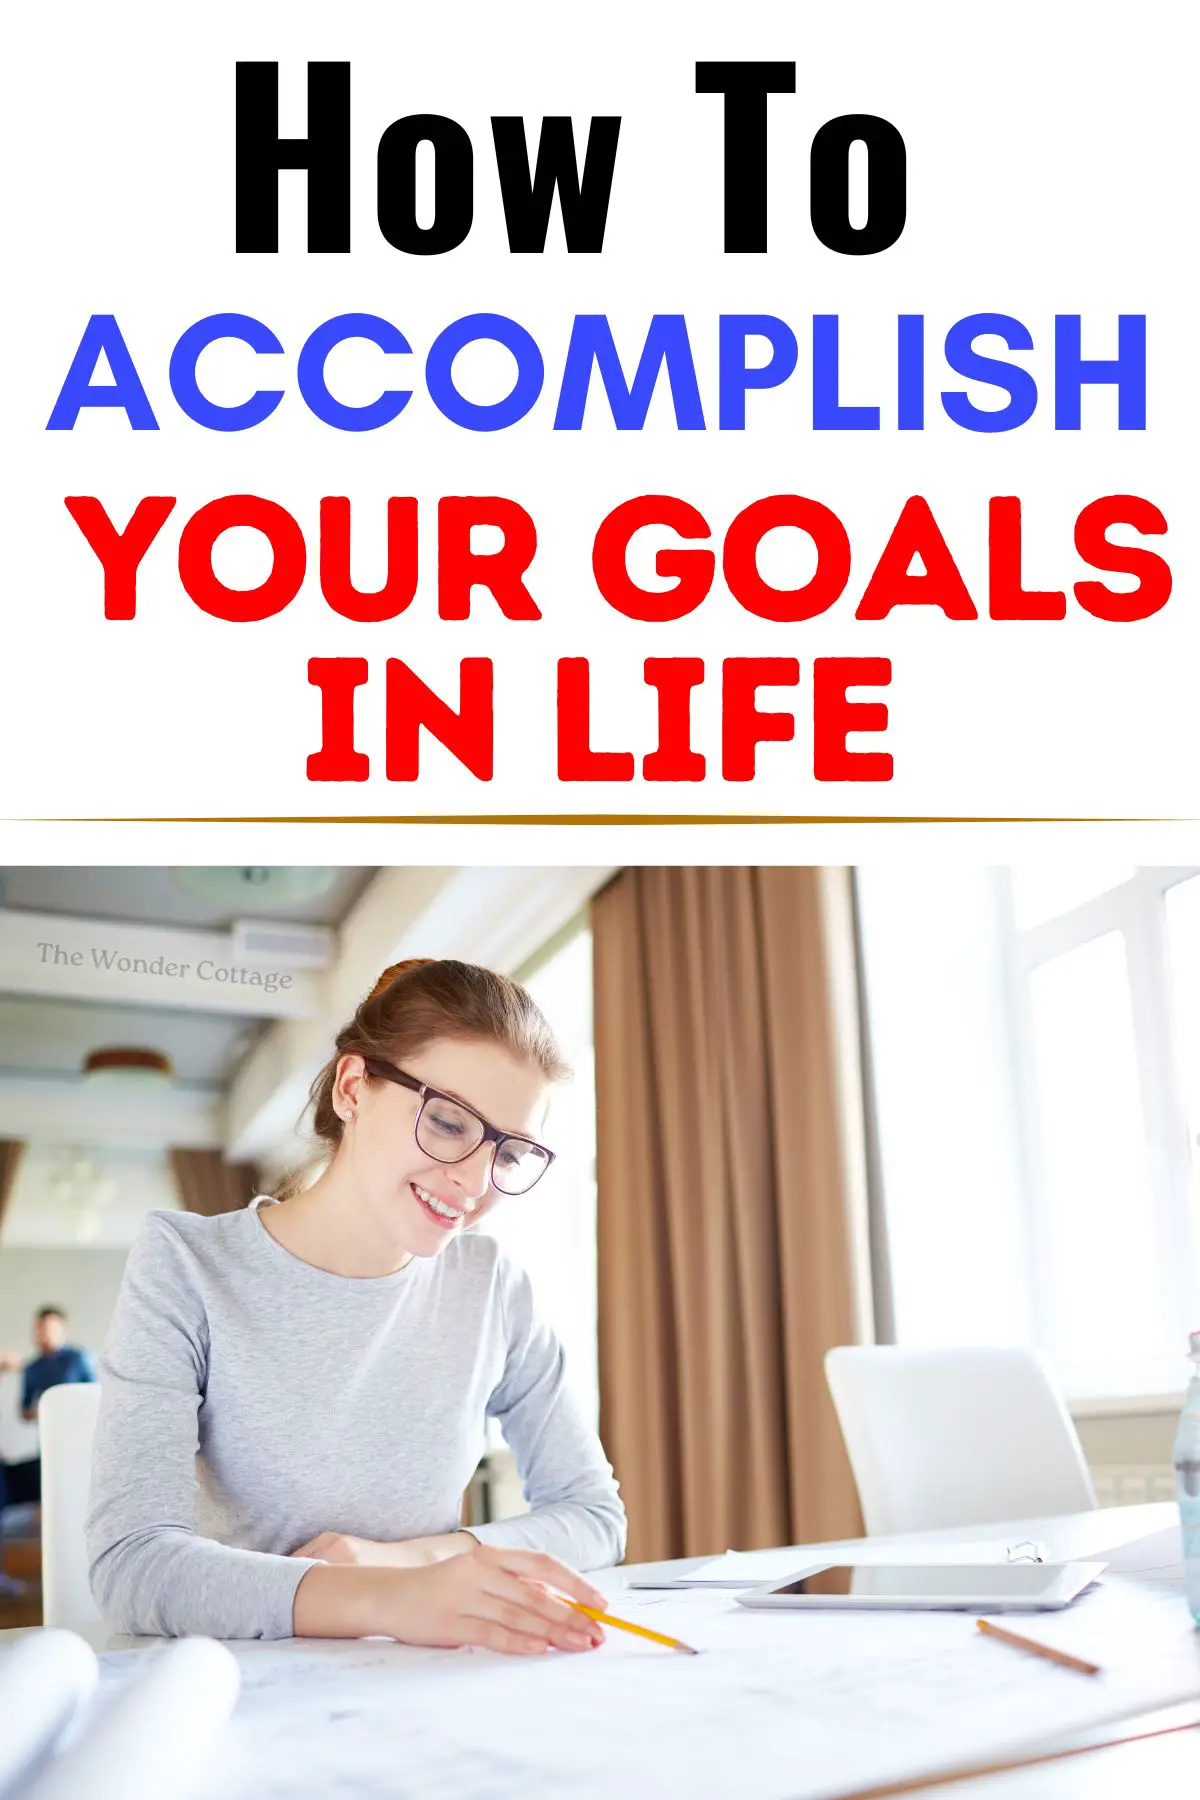 How To Accomplish Your Goals In Life